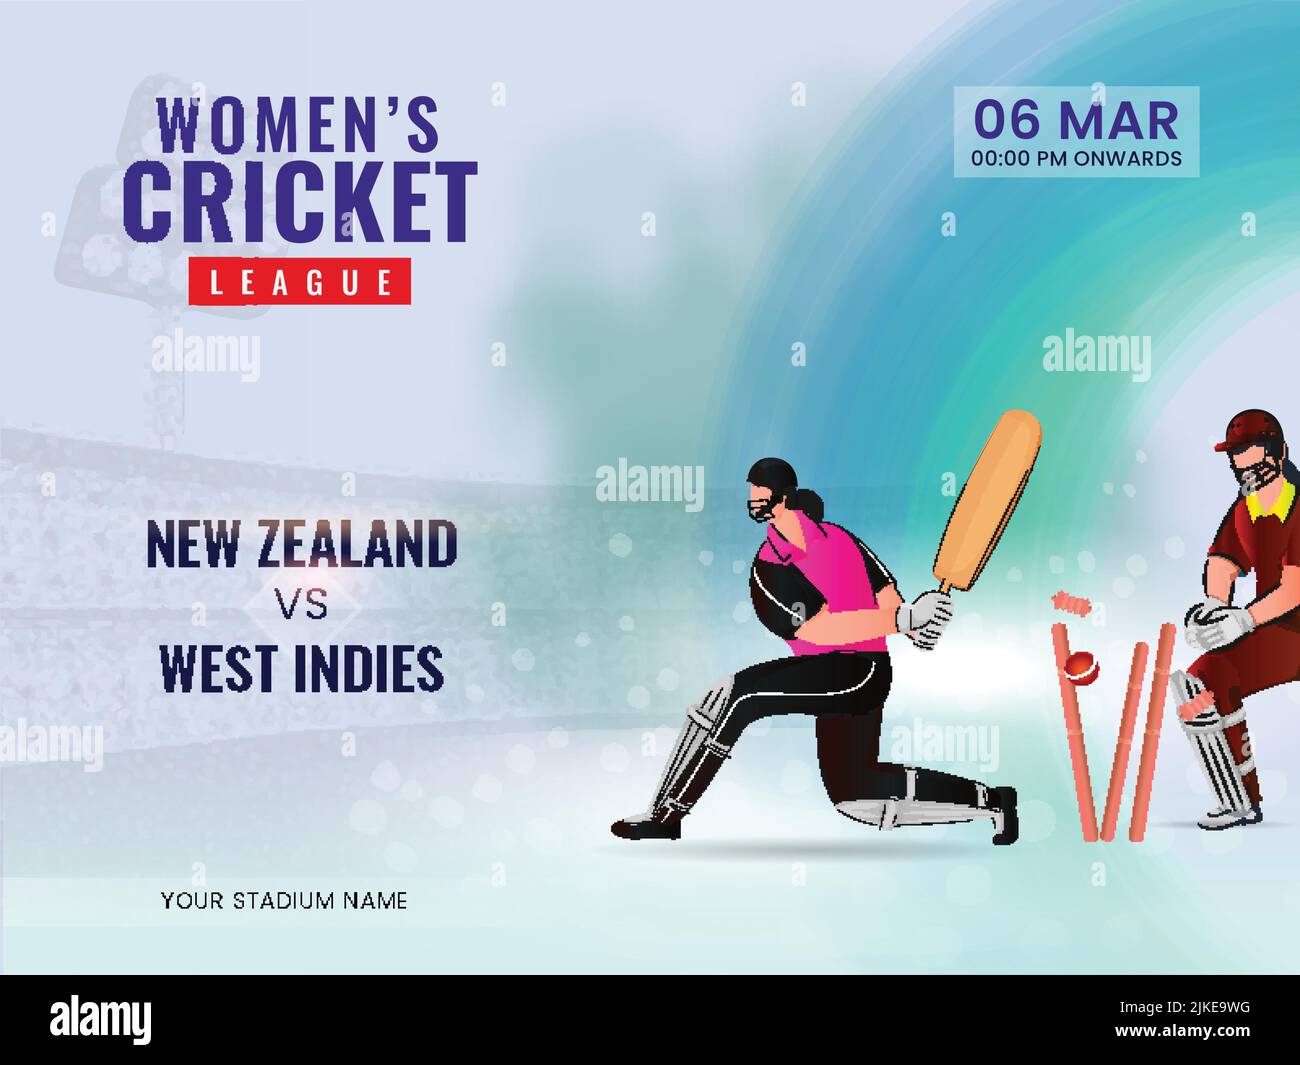 Women's Cricket Match Between New Zealand VS West Indies And Cricketer Players In Action Pose. Stock Vector